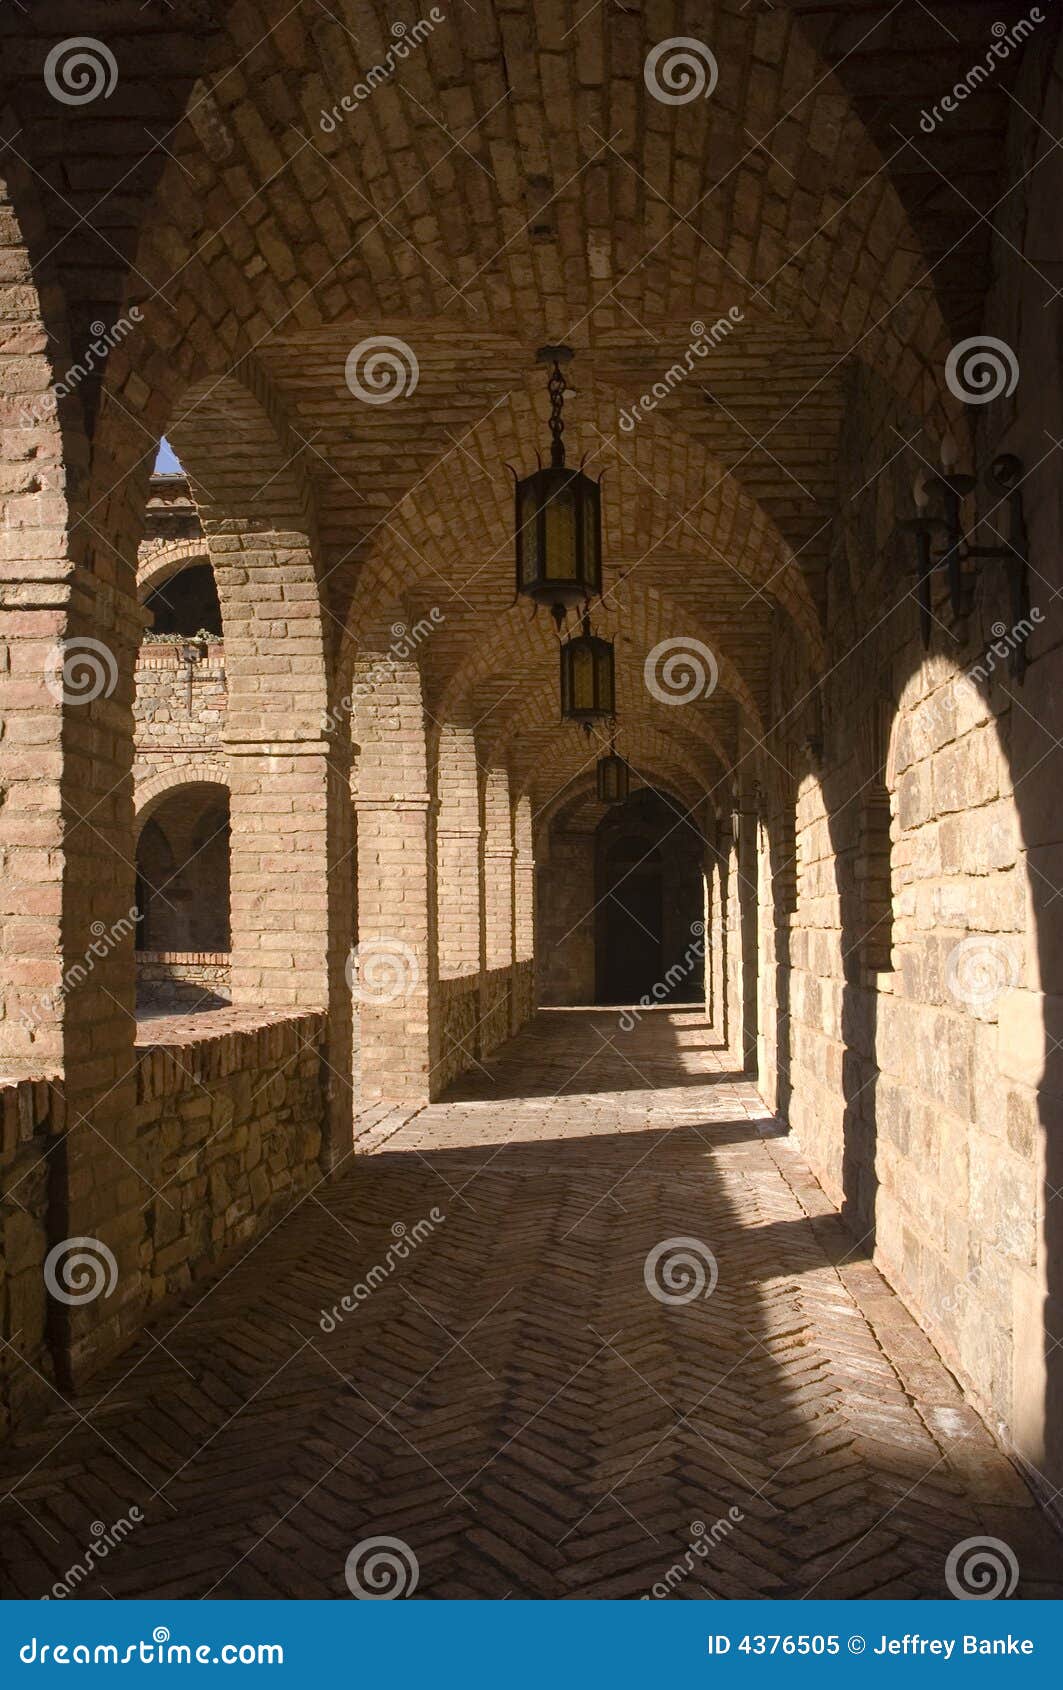 arches of the cloister